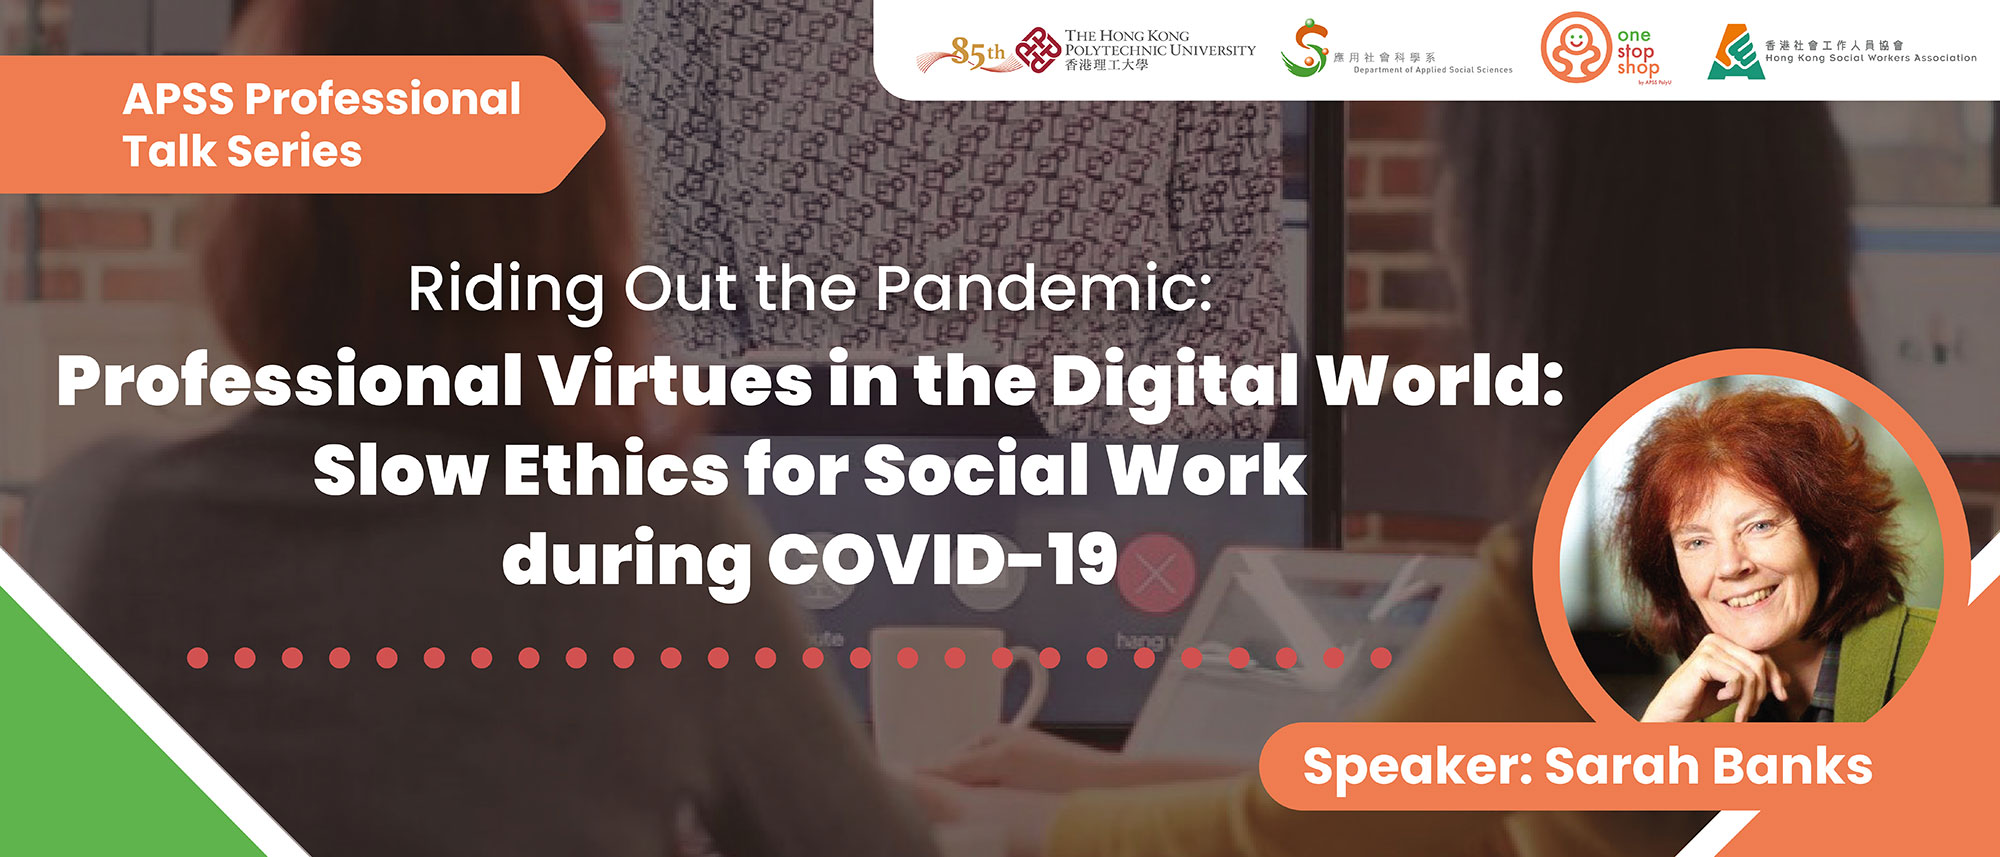 Riding Out the Pandemic: Professional Virtues in the Digital World: Slow Ethics for Social Work during COVID-19